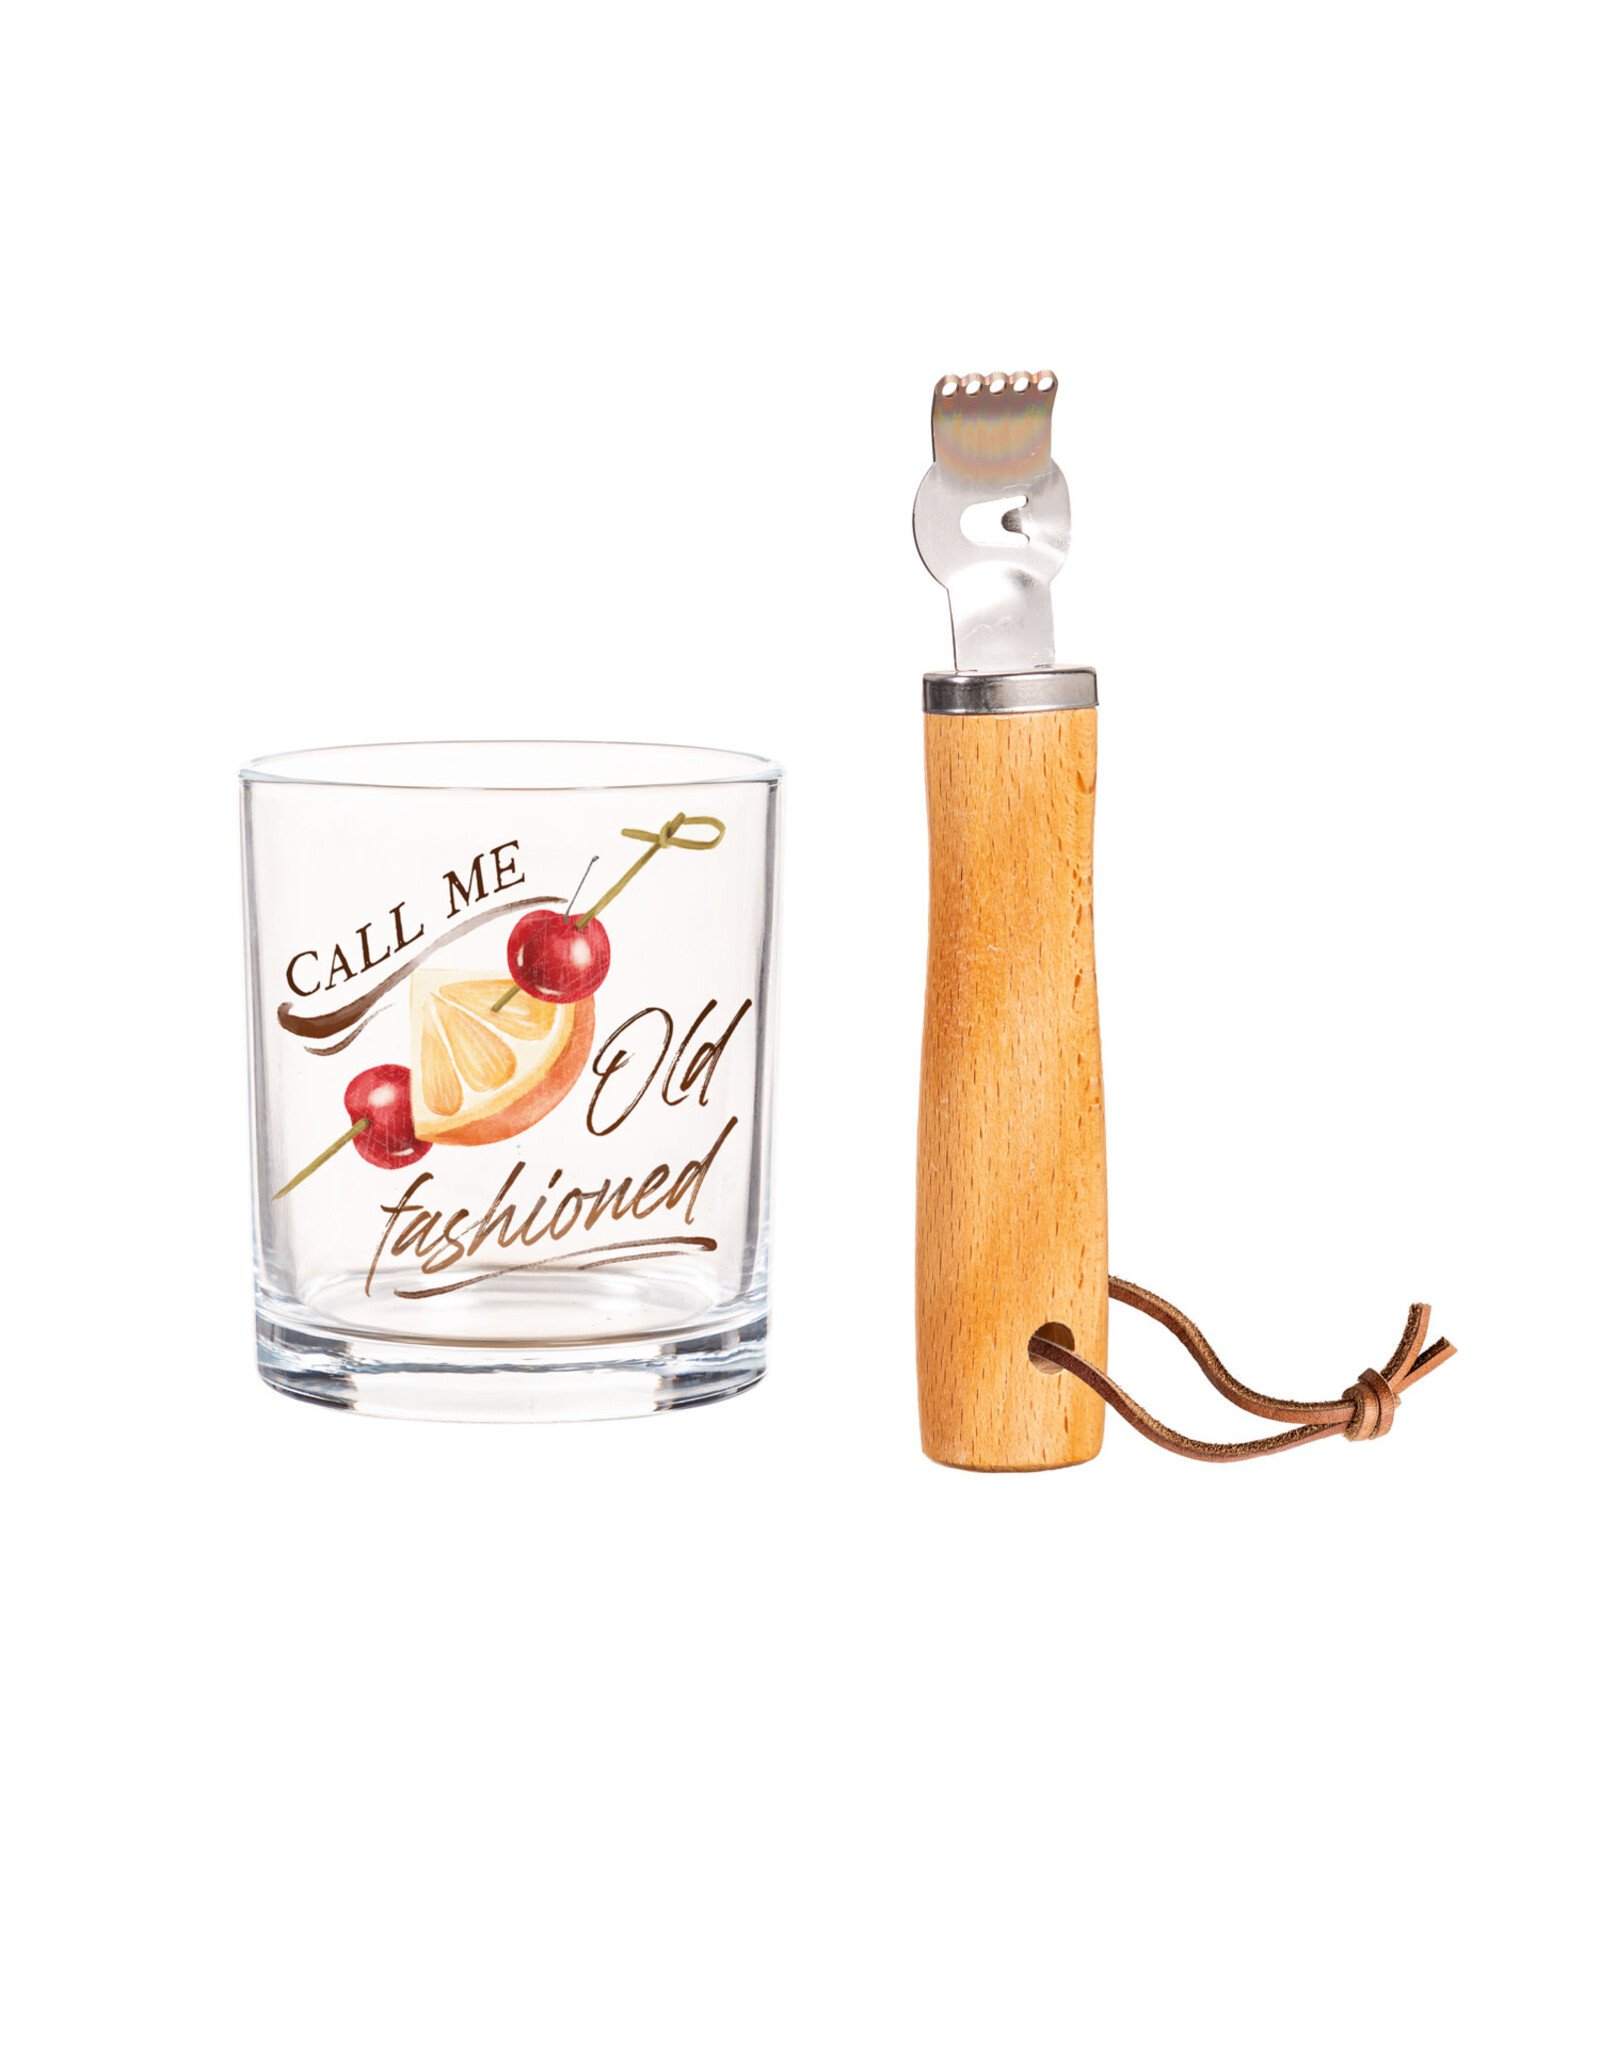 Evergreen Enterprises Citrus Call Me Old Fashioned Whiskey Glass and Zester